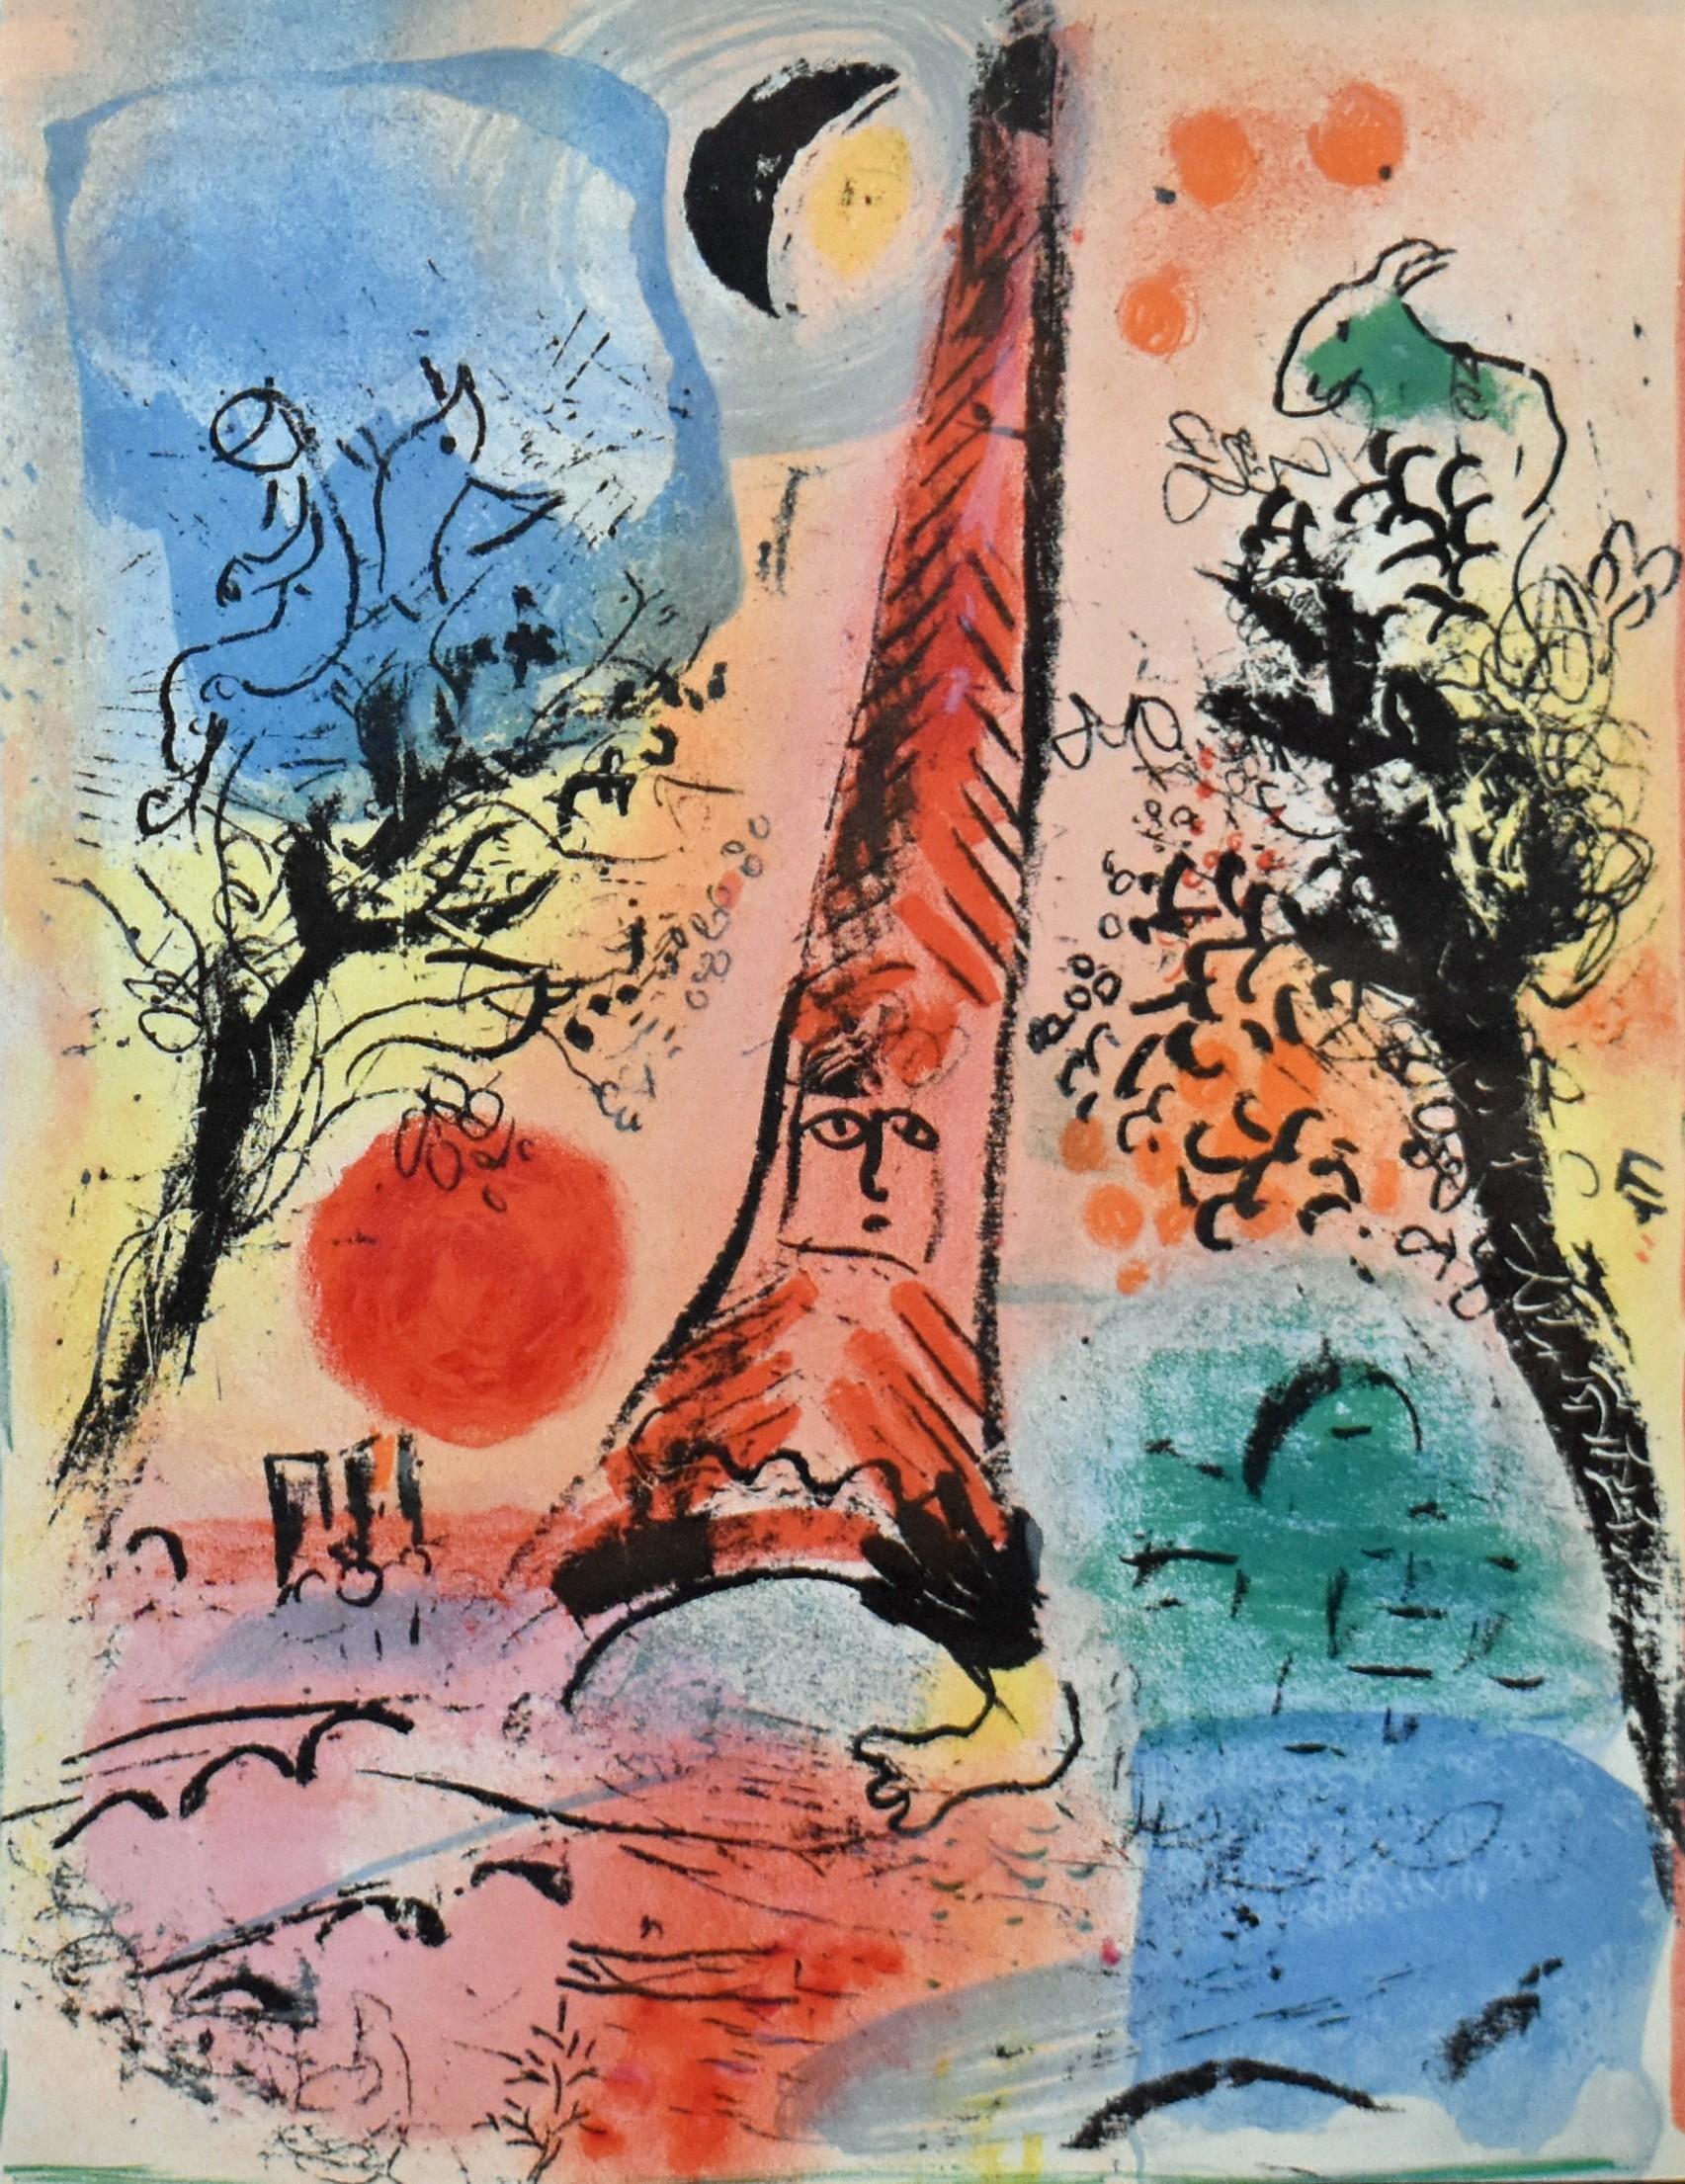 Vision of Paris - Print by Marc Chagall